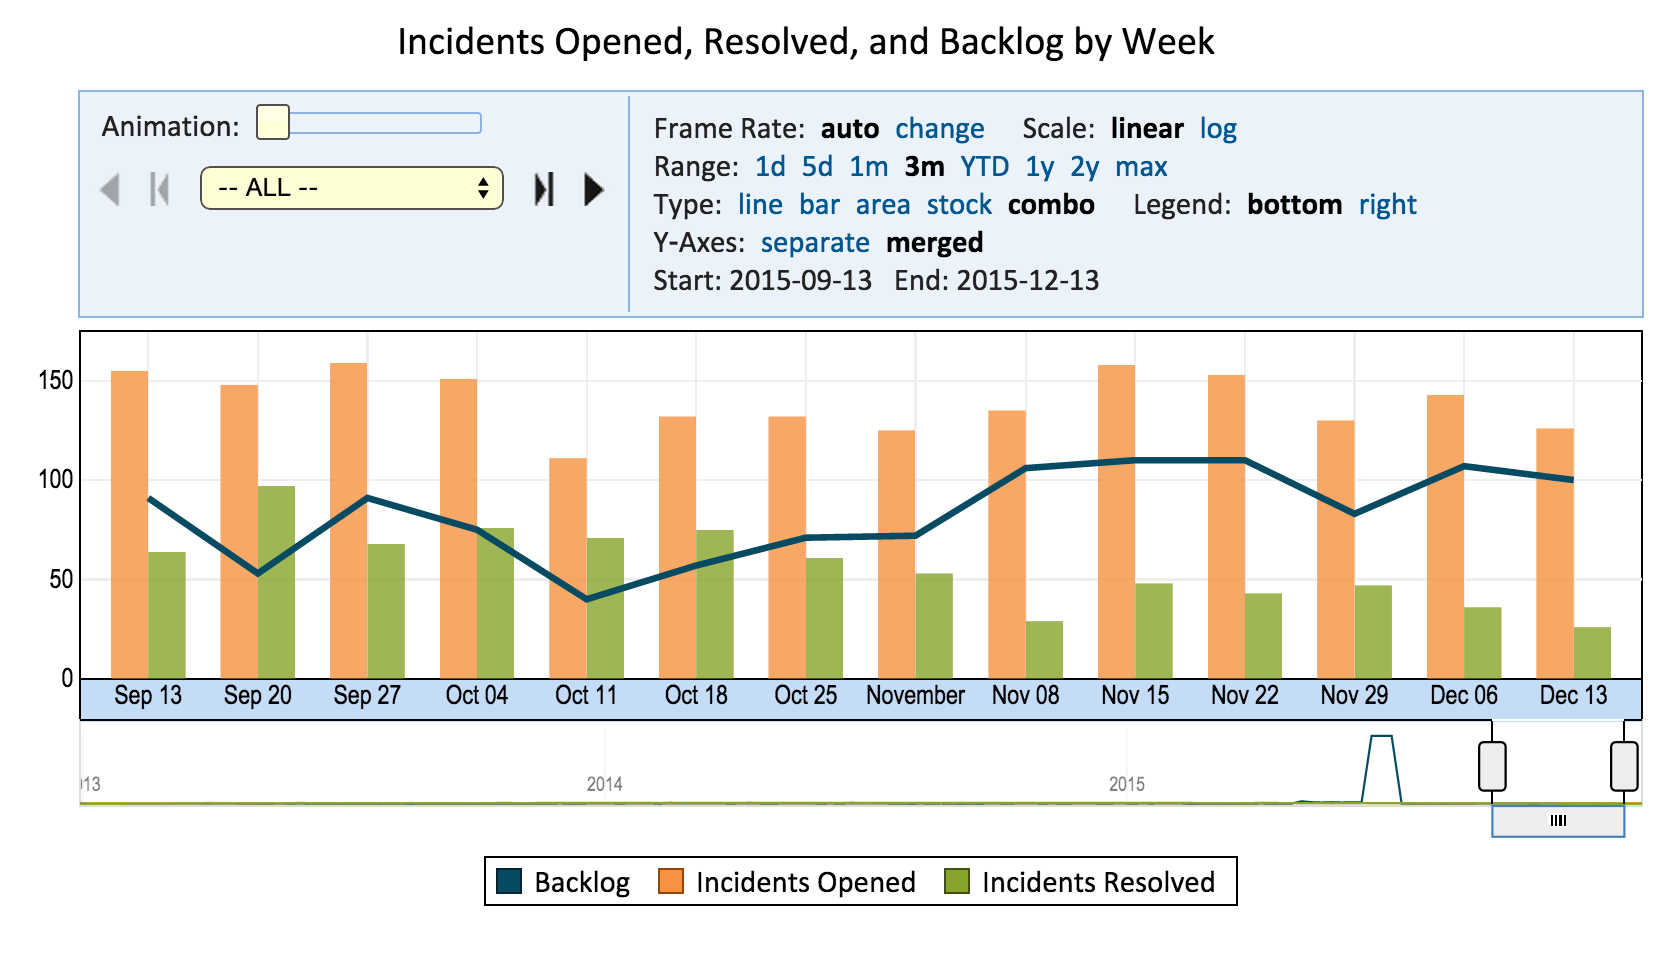 SN_-_Incidents_Opened__Resolved__Backlog_by_Week.png